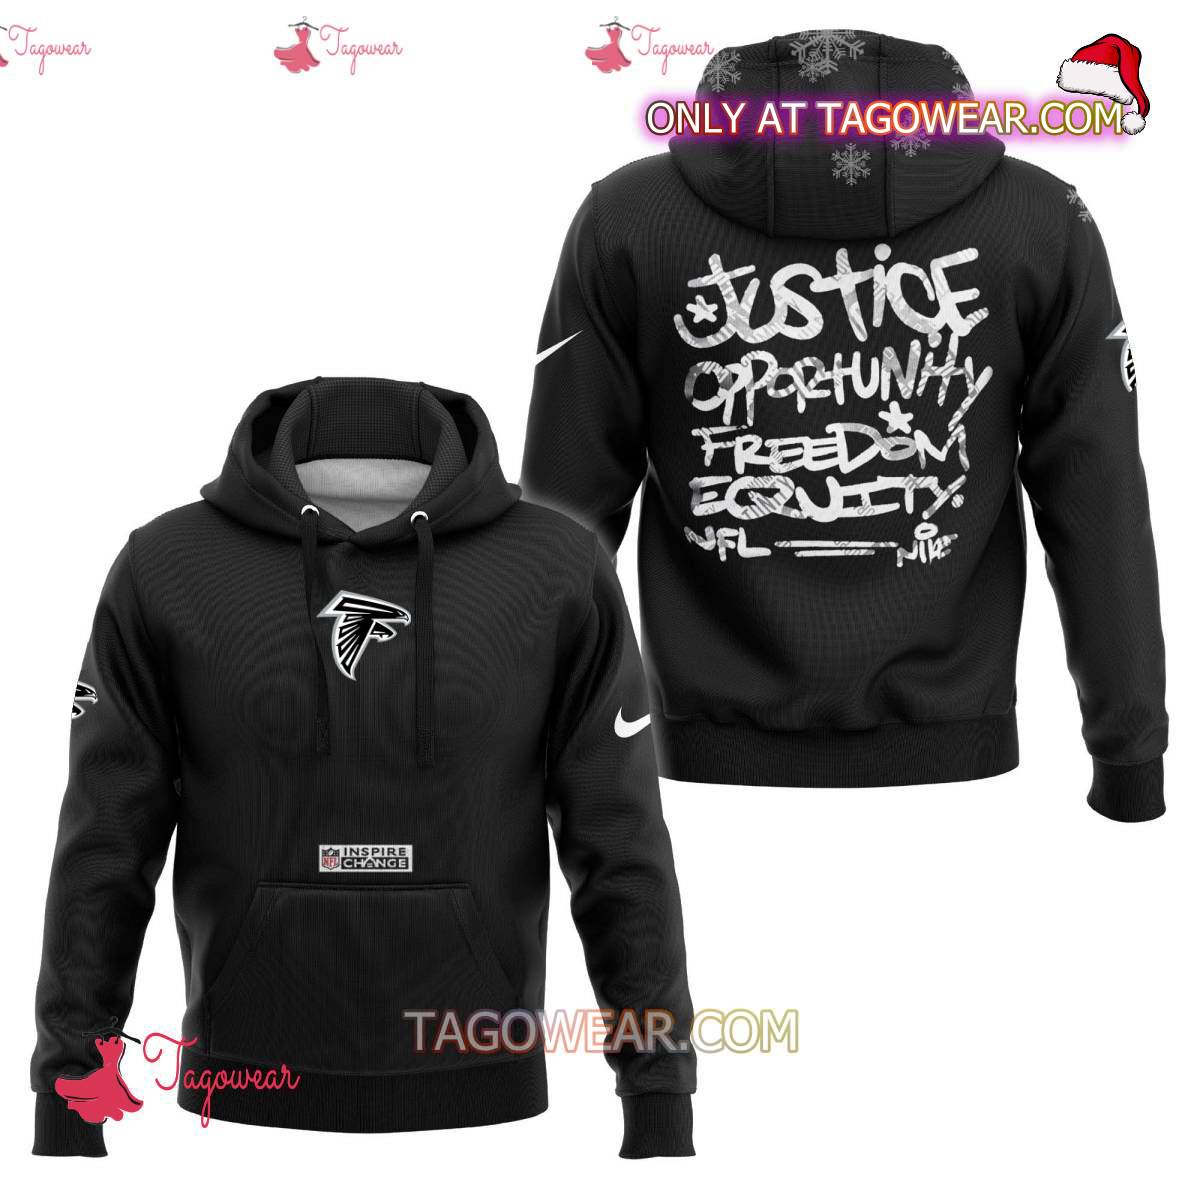 Atlanta Falcons NFL Inspire Change Justice Opportunity Equality Freedom Hoodie